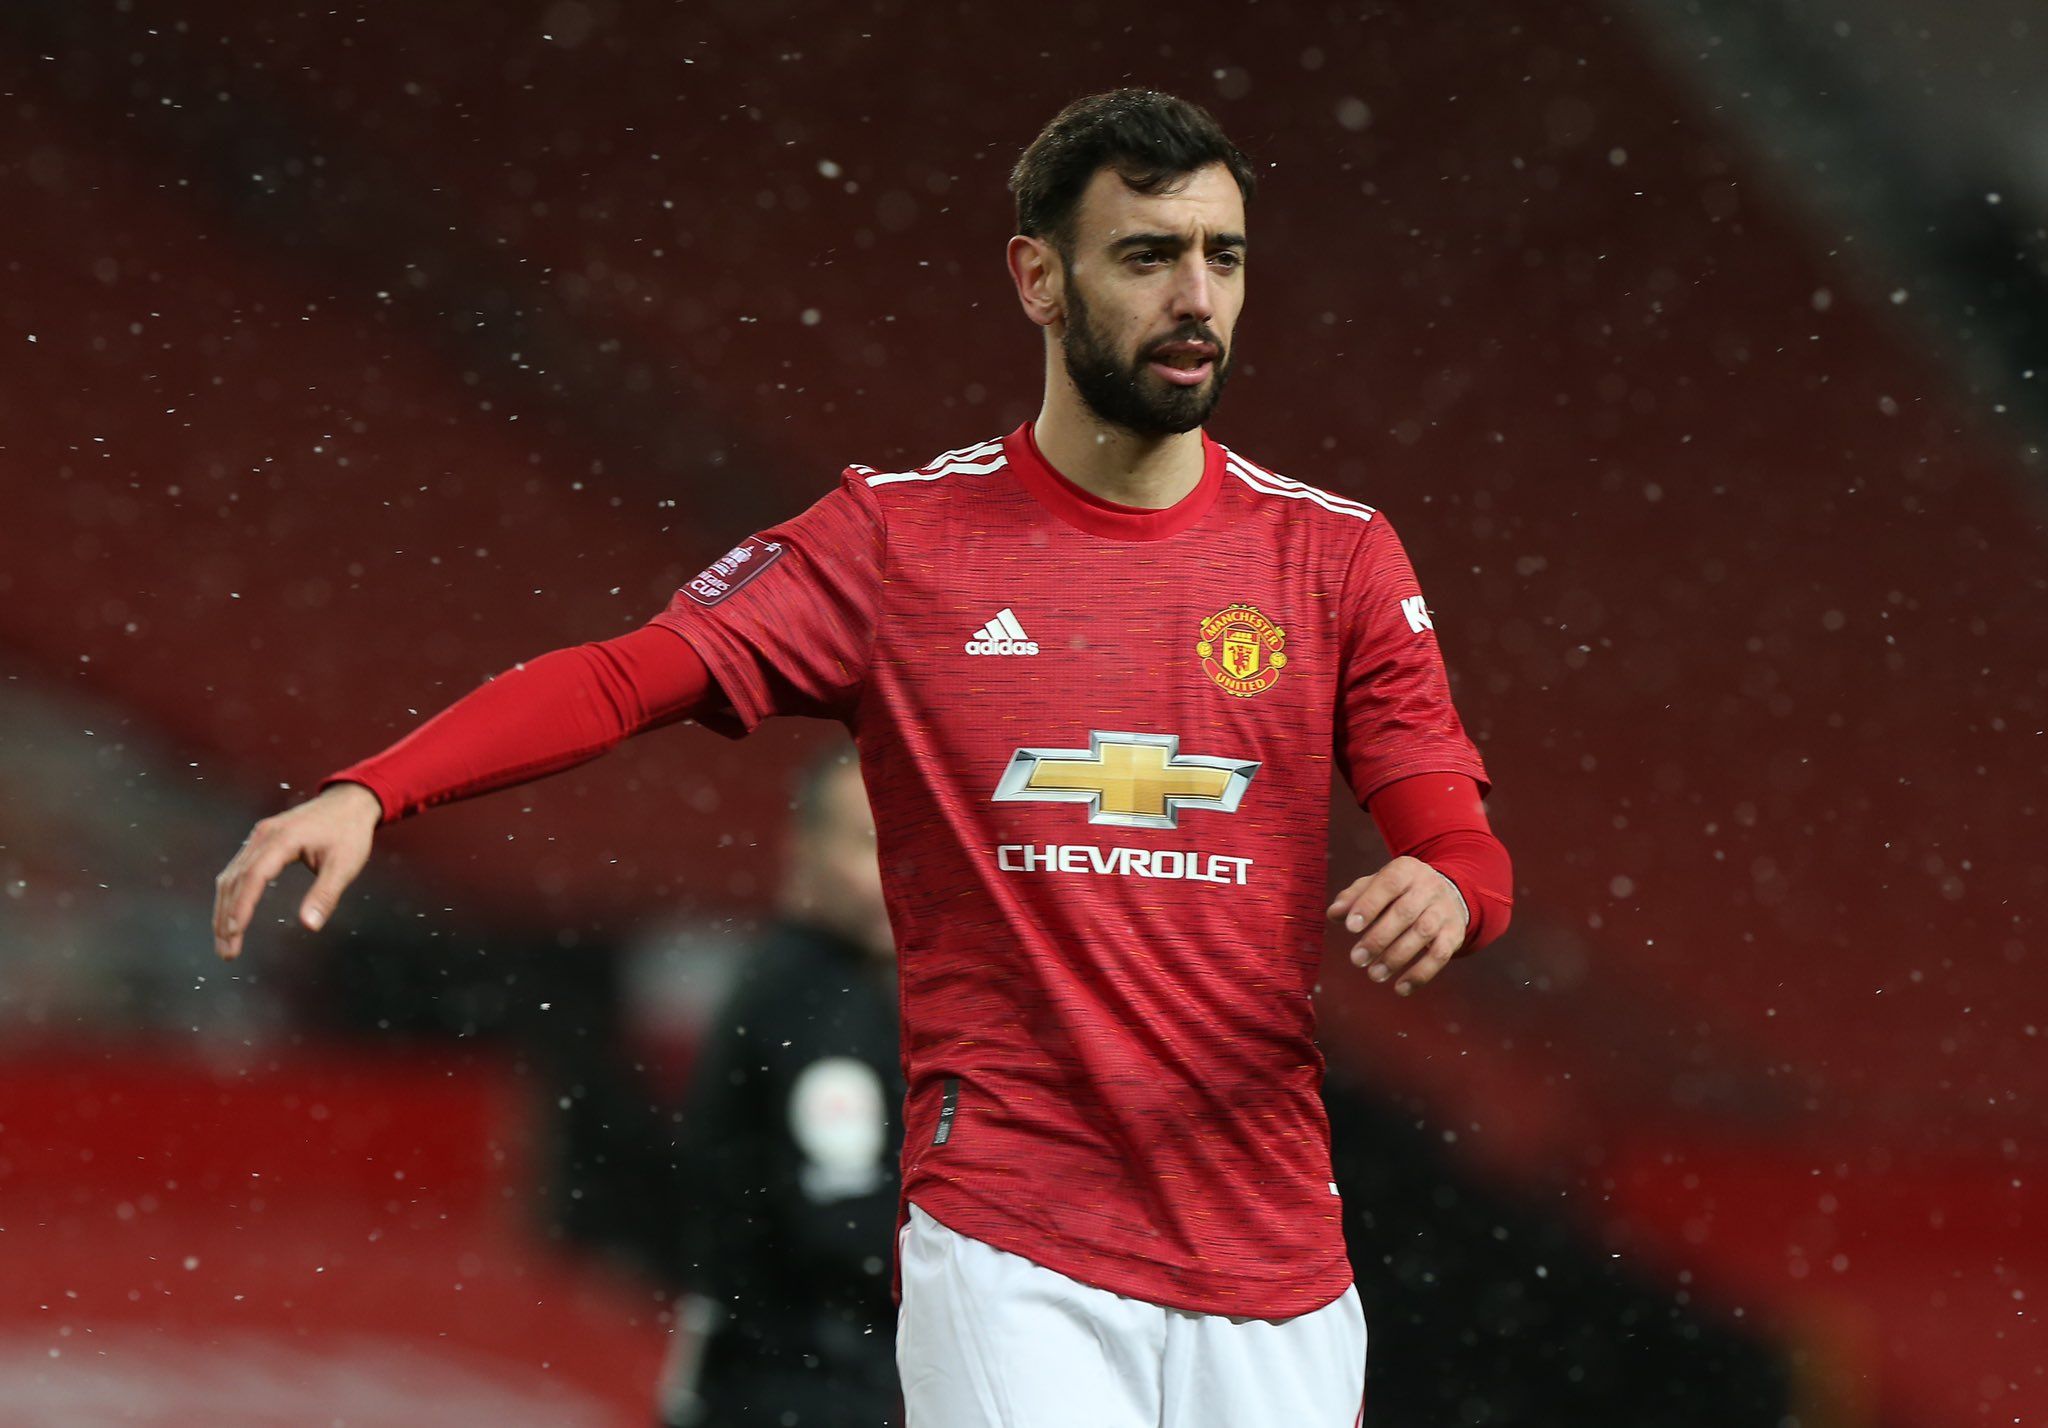 Europa League: Bruno Fernandes to captain Manchester United against Real Sociedad